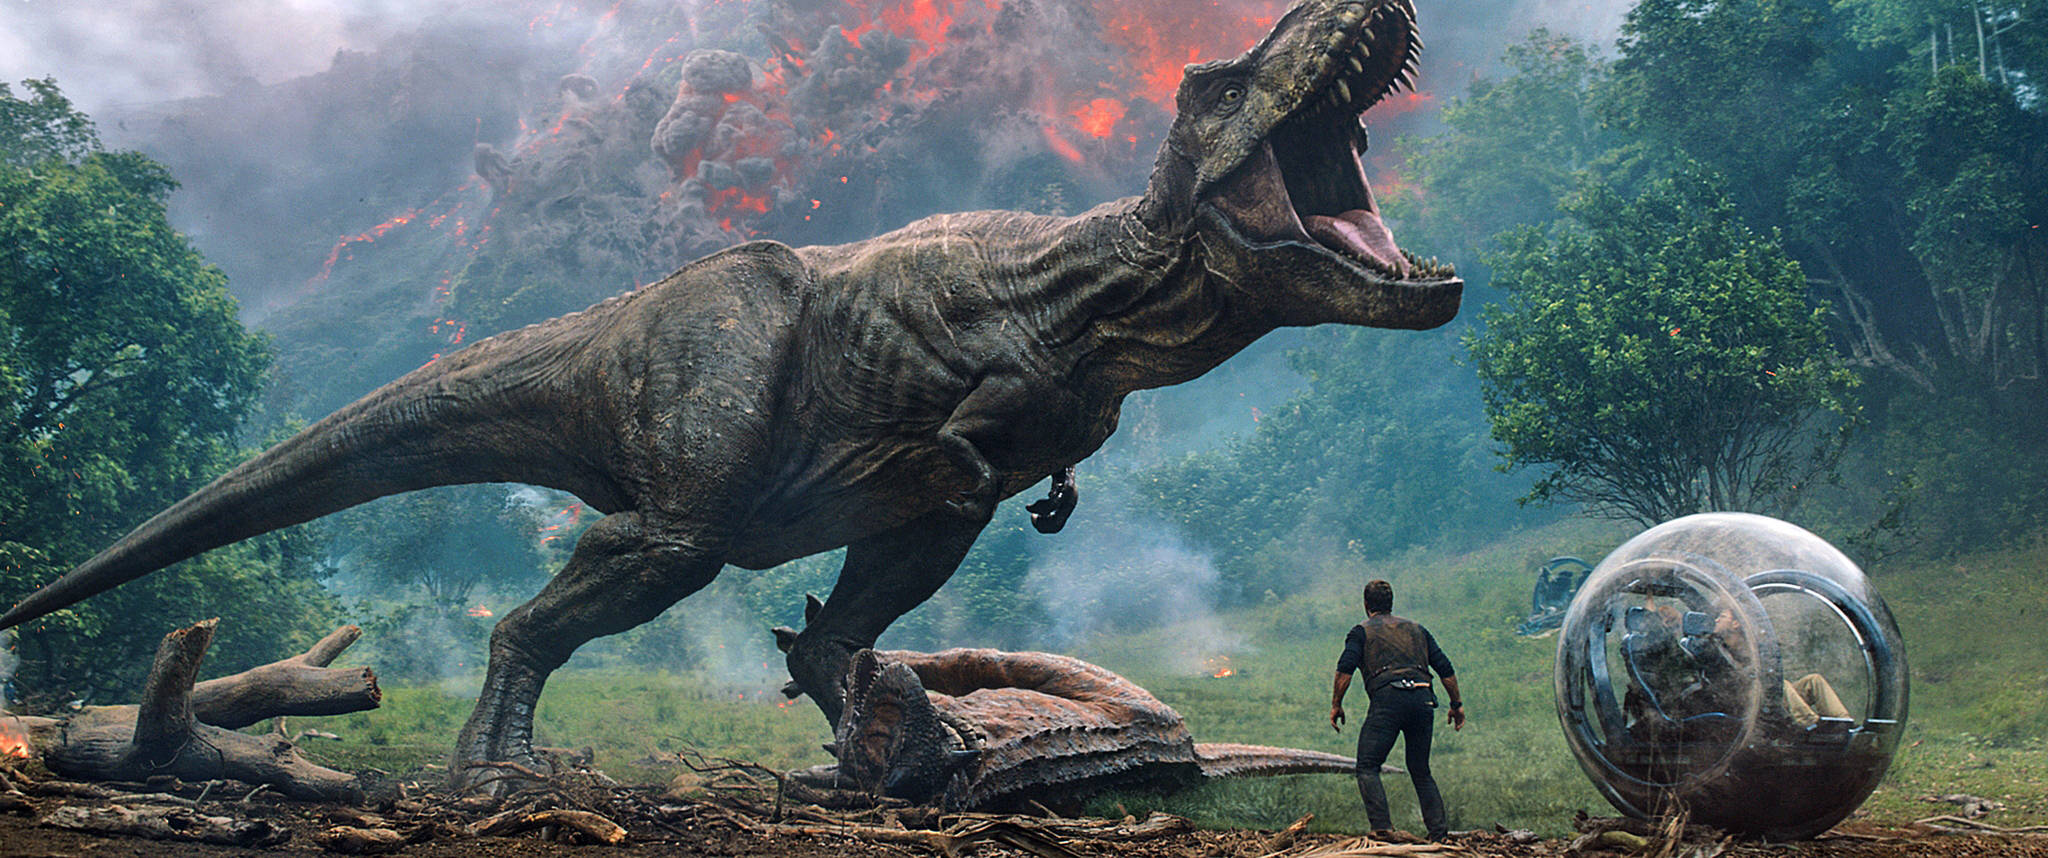 Universal launches plans for third ‘Jurassic World’ film